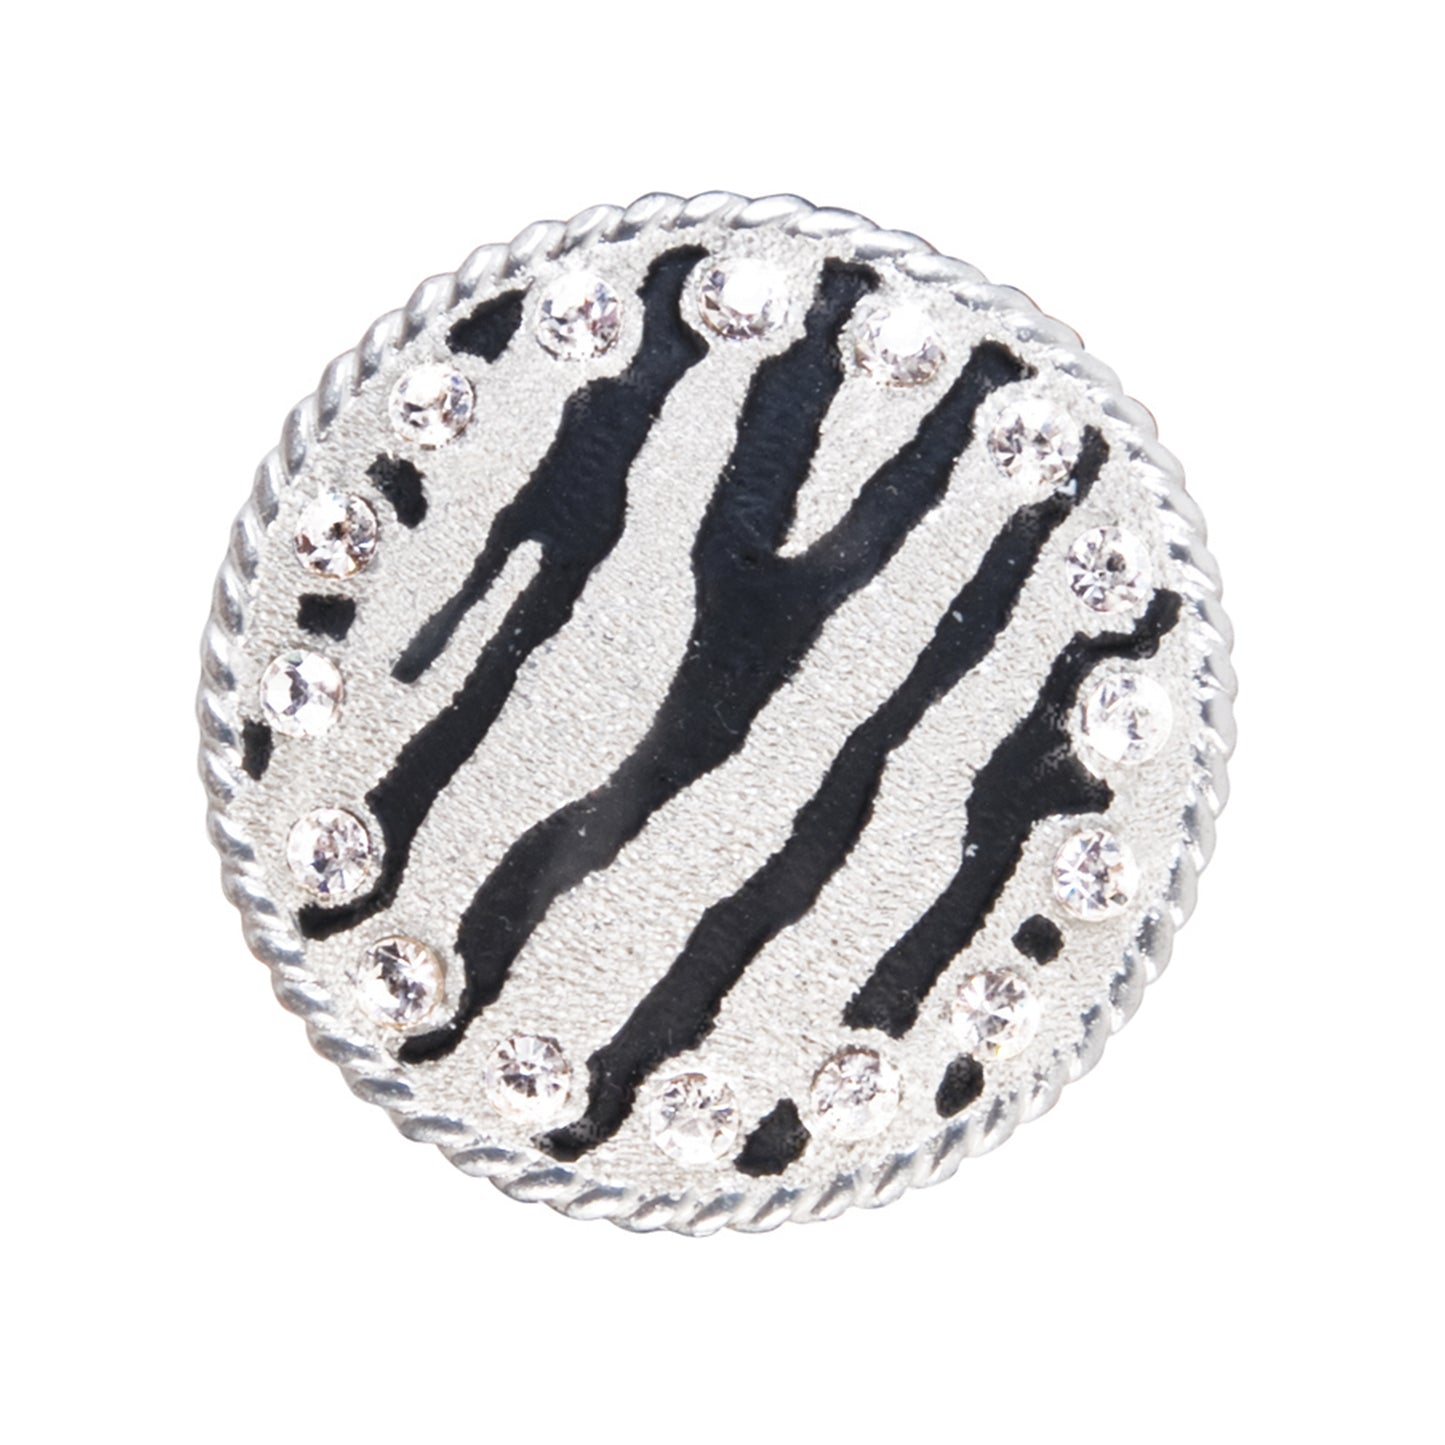 1-1/2" A4 Round zebra concho with clear crystals around edge (set of 4). 